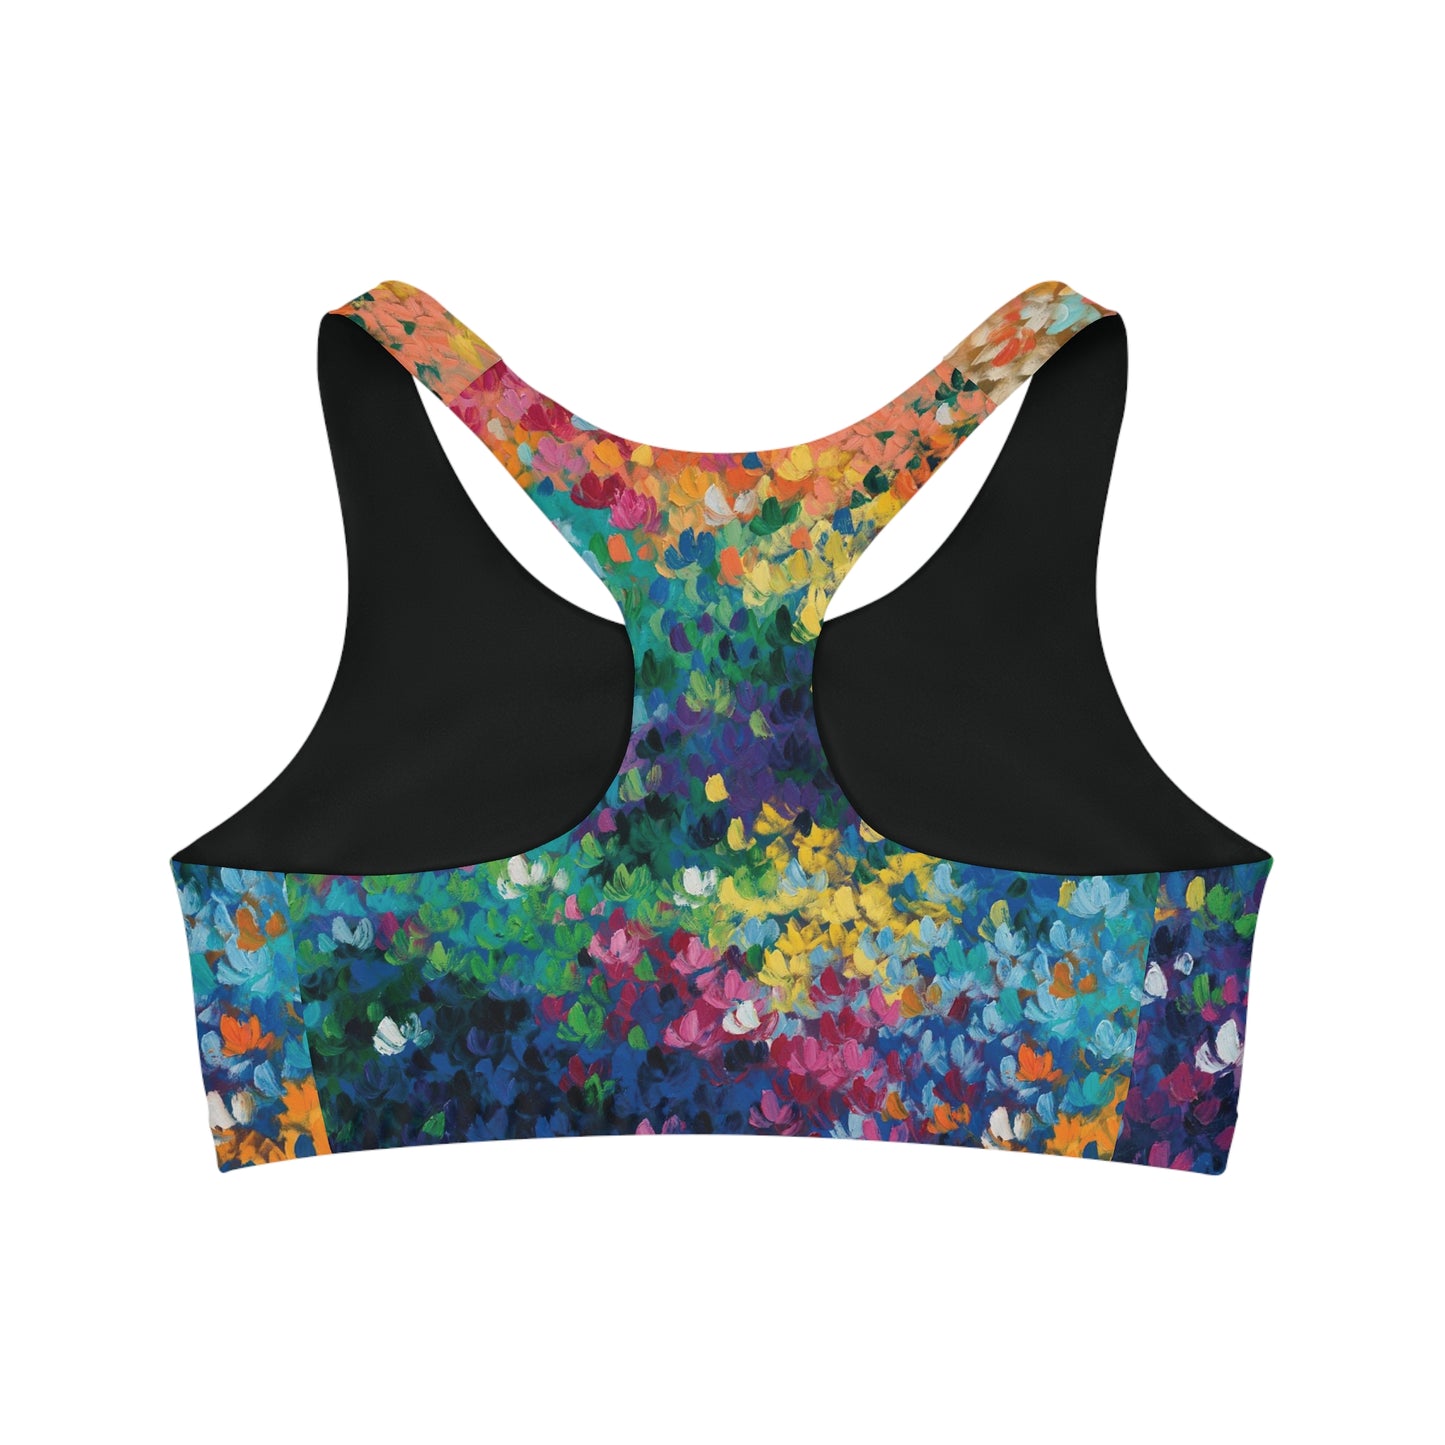 Everything About Us Seamless Sports Bra